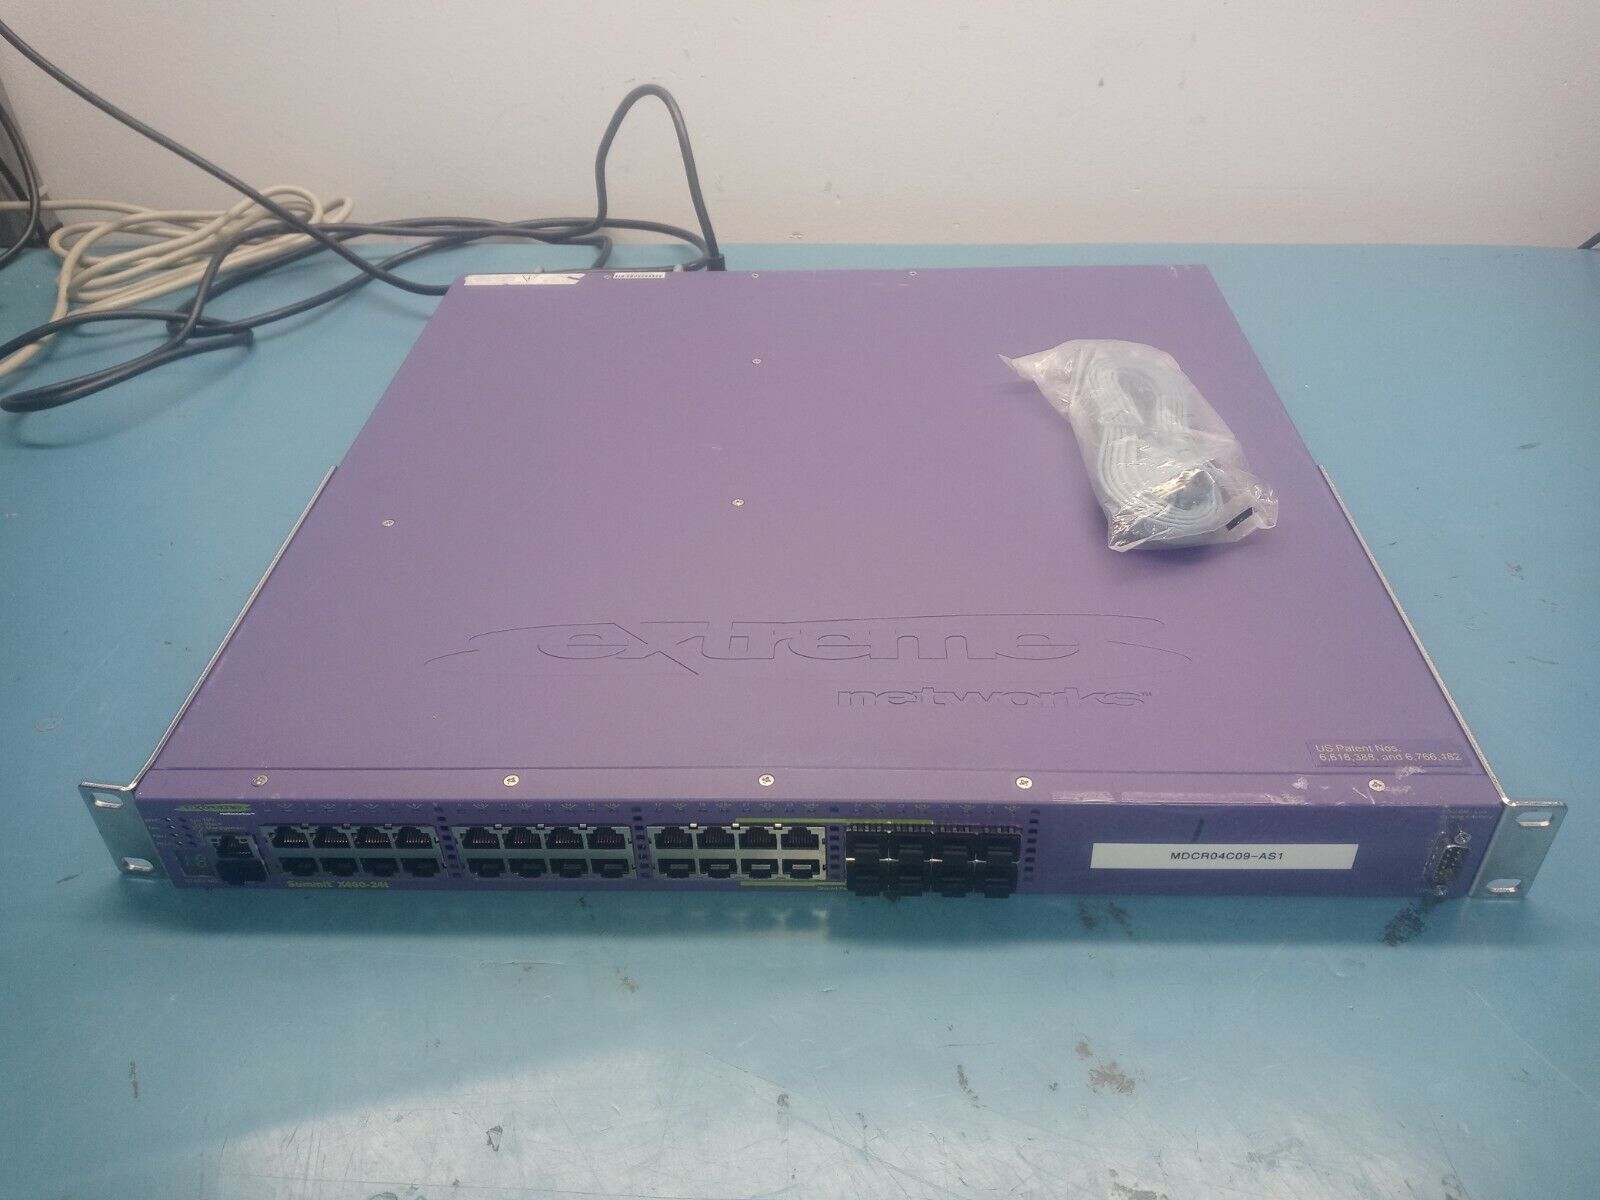 Extreme Networks 16401 Summit X460-24t 24 Port Gigabit with xgm3-2sf  2-port sfp